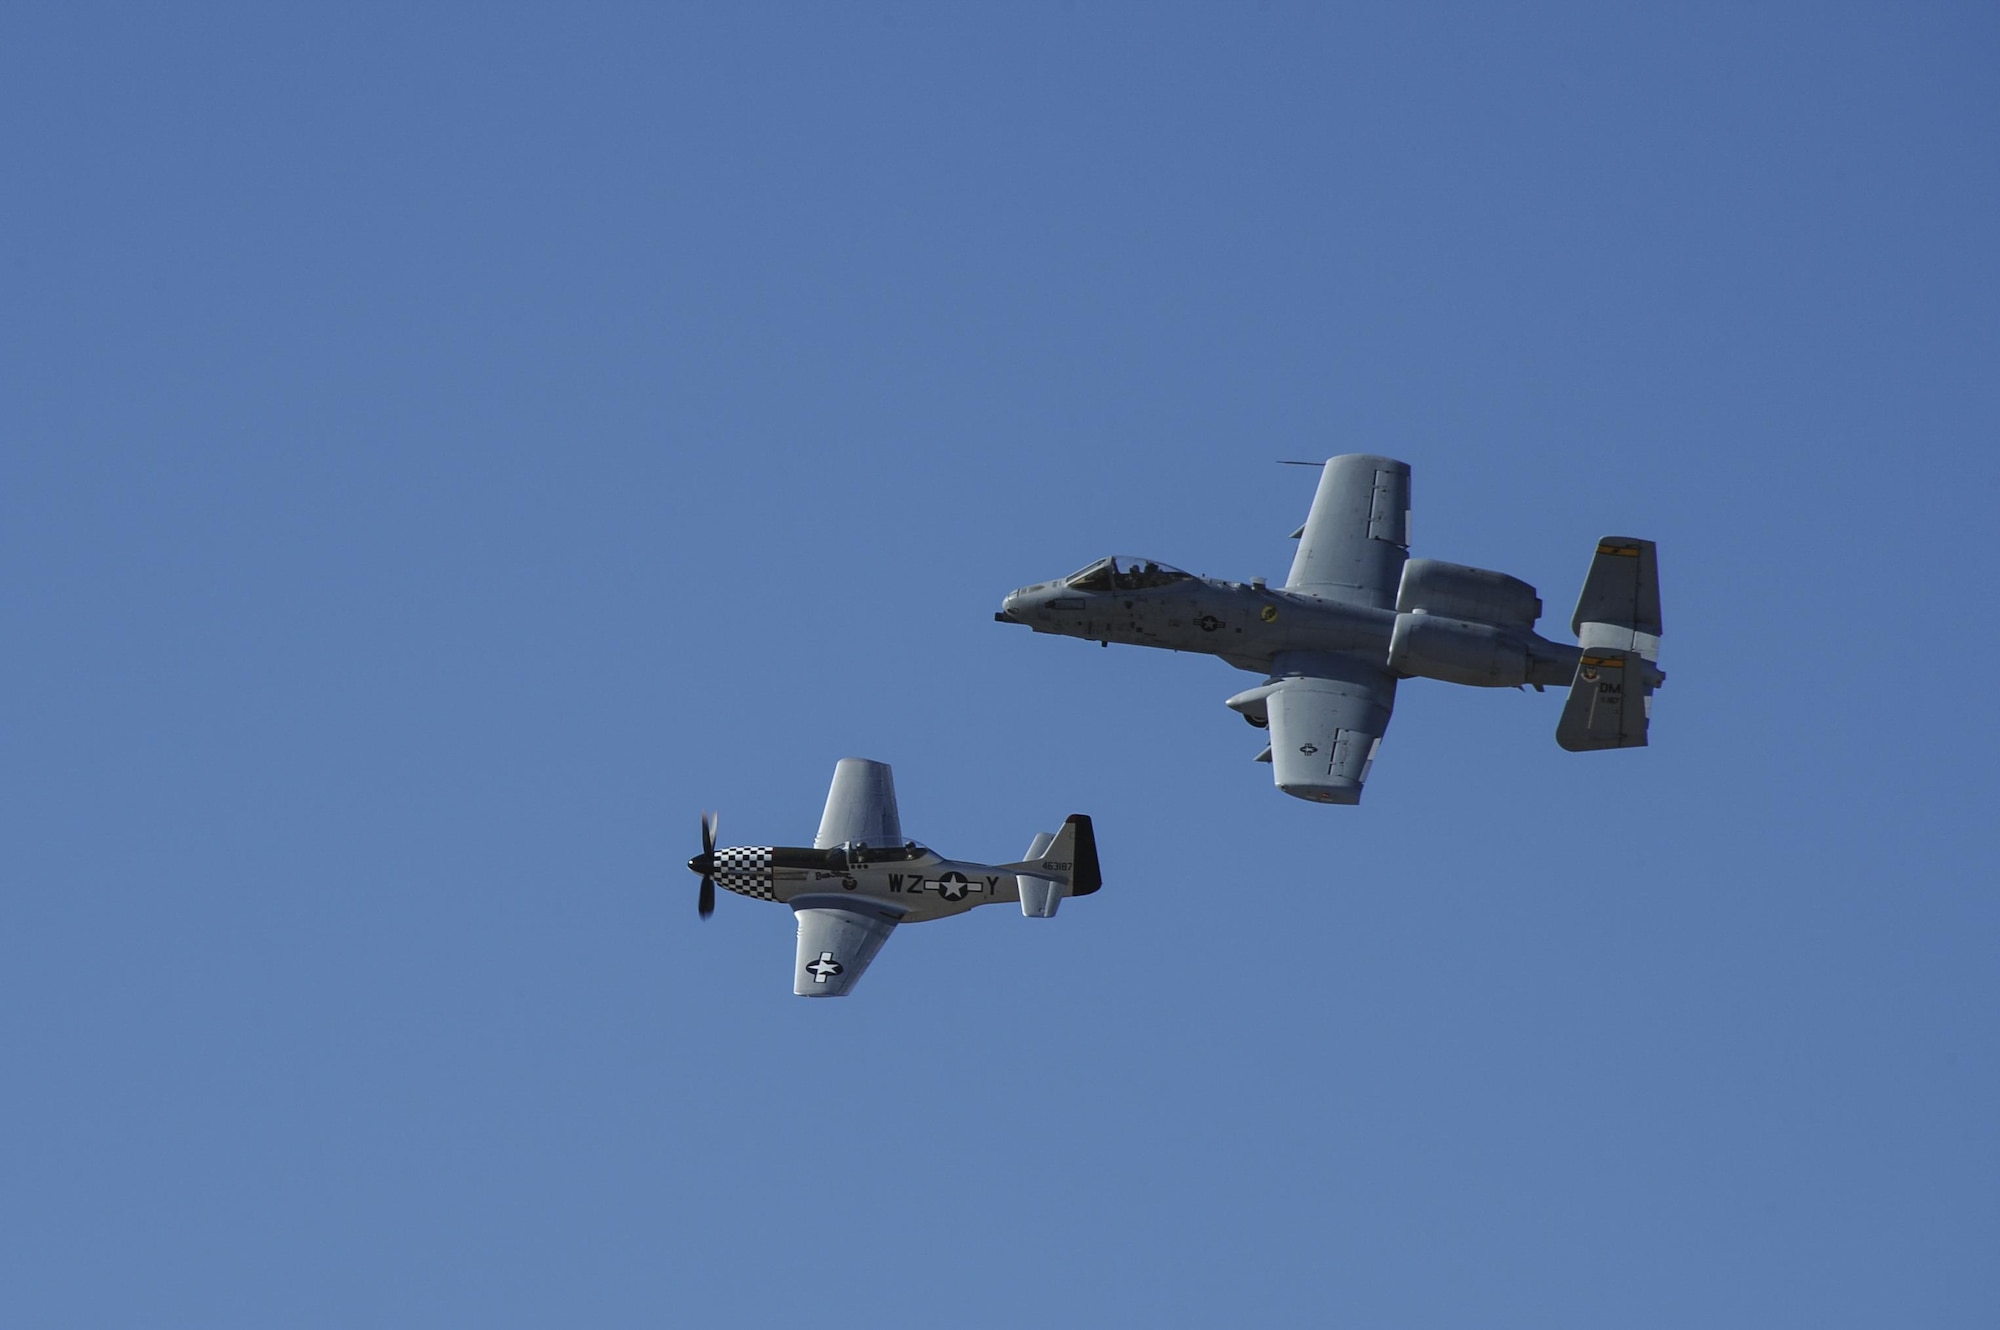 A U.S. Air Force A-10C Thunderbolt II and a TF-51 Mustang fly together during the 2017 Heritage Flight Training and Certification Course at Davis-Monthan Air Force Base, Ariz., Feb. 10, 2017. The annual aerial demonstration training event has been held at D-M since 2001, the course featured aerial demonstrations from historic and modern fighter aircraft. (U.S. Air Force photo by Airman 1st Class Mya M. Crosby)